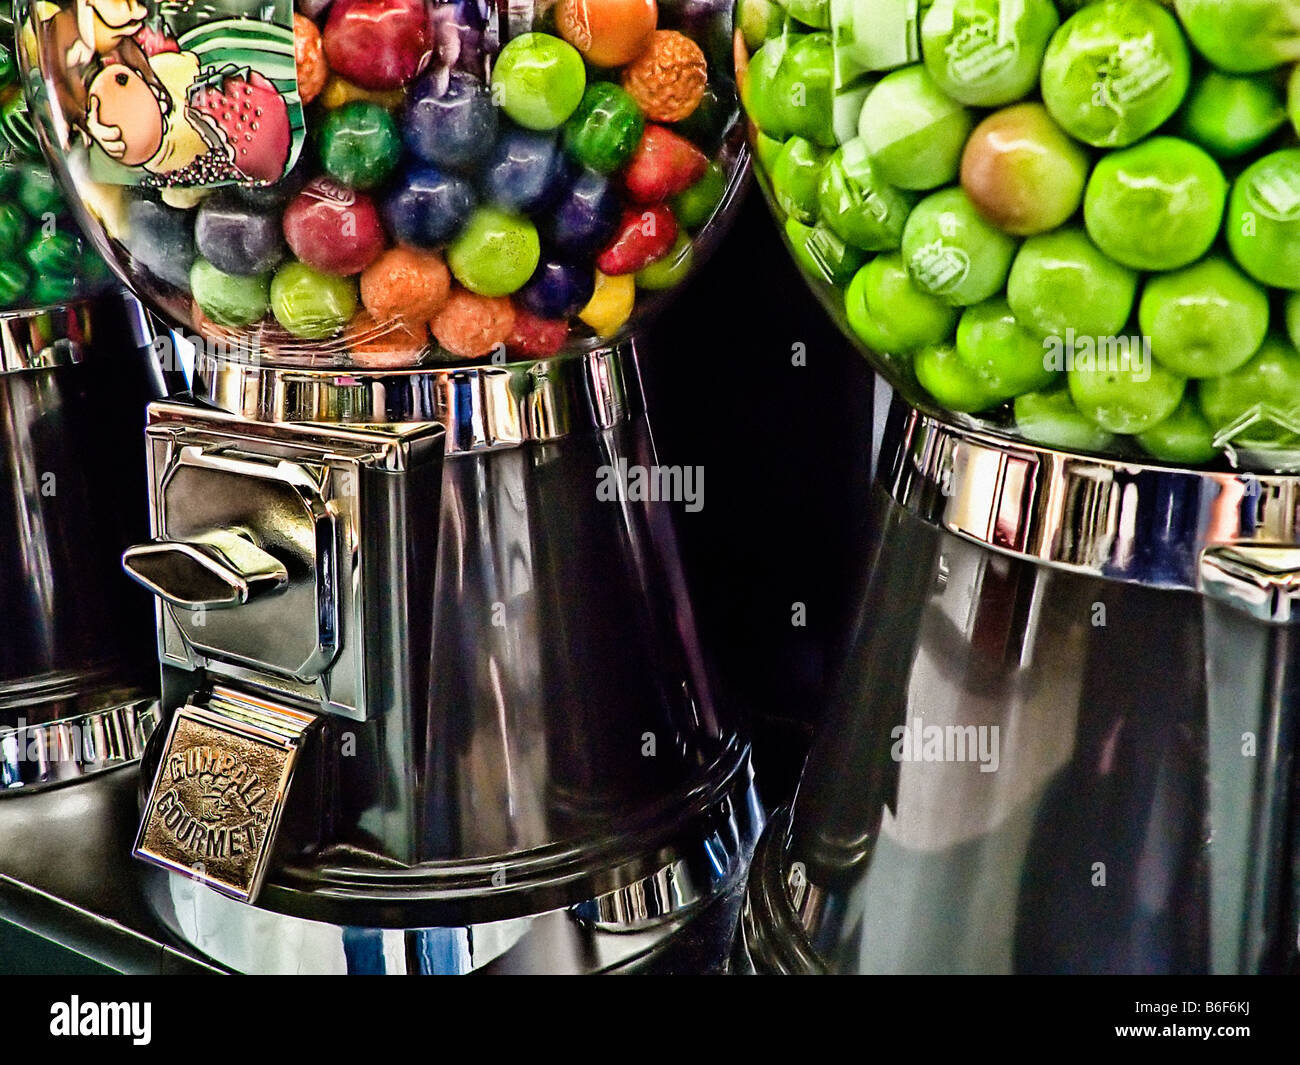 line of coin operated gumball machines Stock Photo